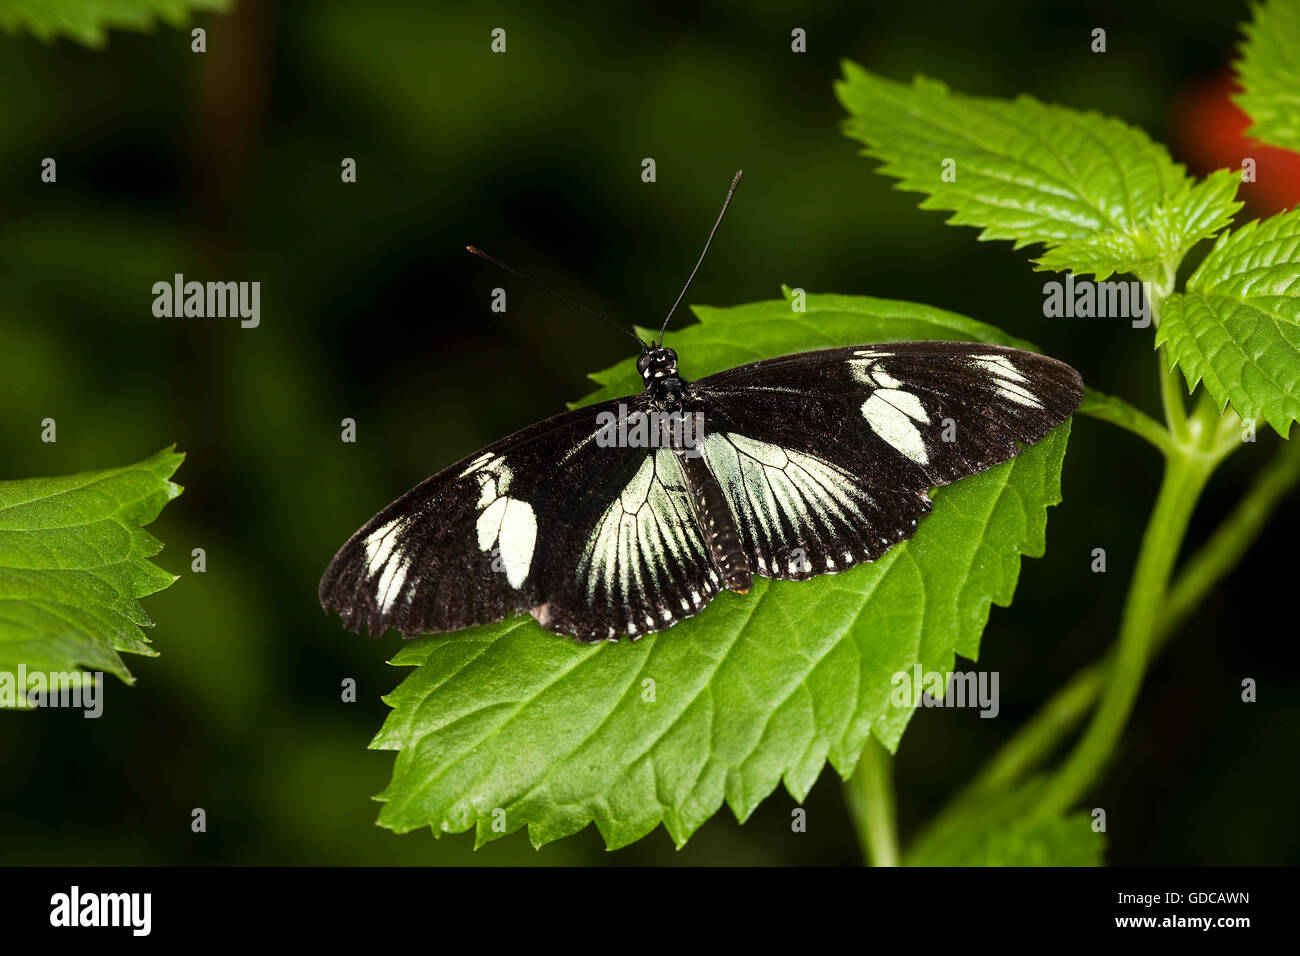 African Swallowtail, papilio dardanus, Butterfly on Leaf Stock Photo